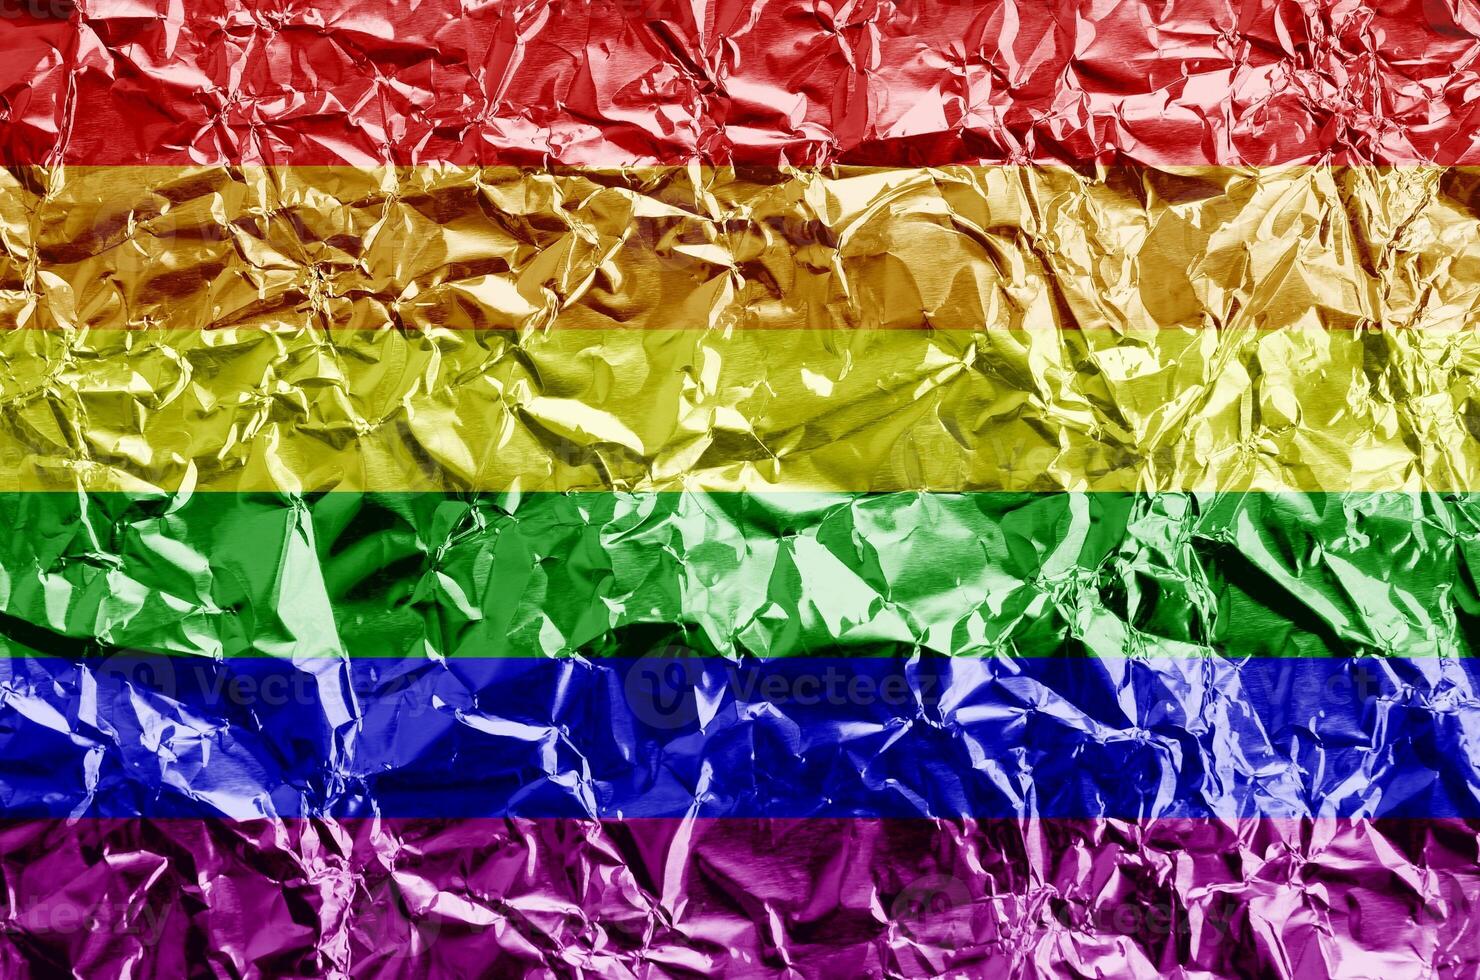 LGBT community flag depicted in paint colors on shiny crumpled aluminium foil closeup. Textured banner on rough background photo